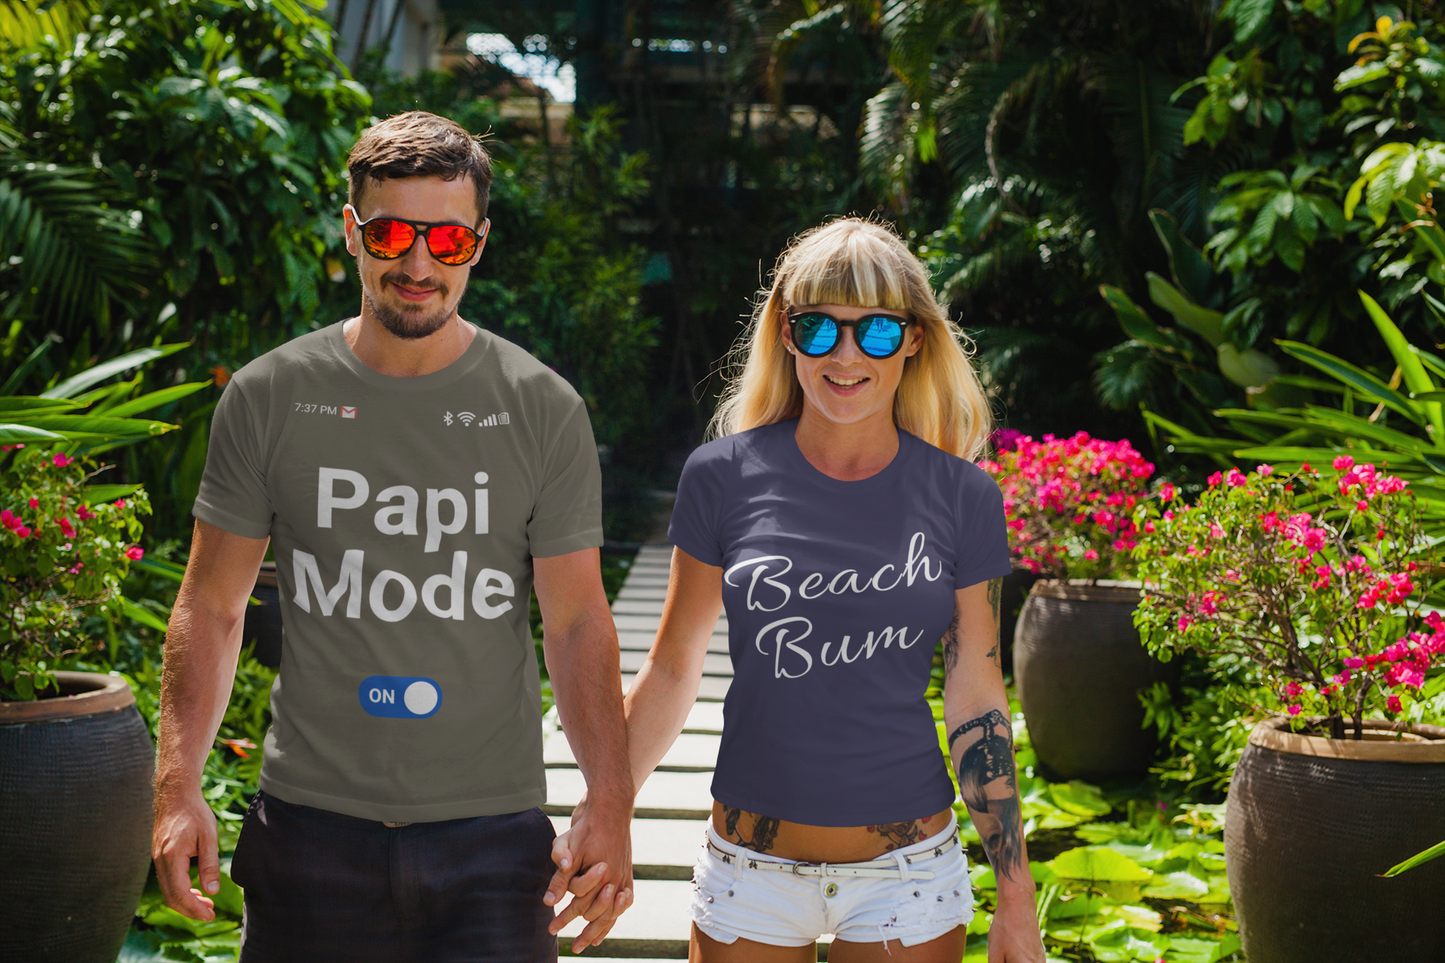 Papi Mode On Men’s Designer Tee - Playful Tech-Inspired Shirt, Perfect Gift for Dads